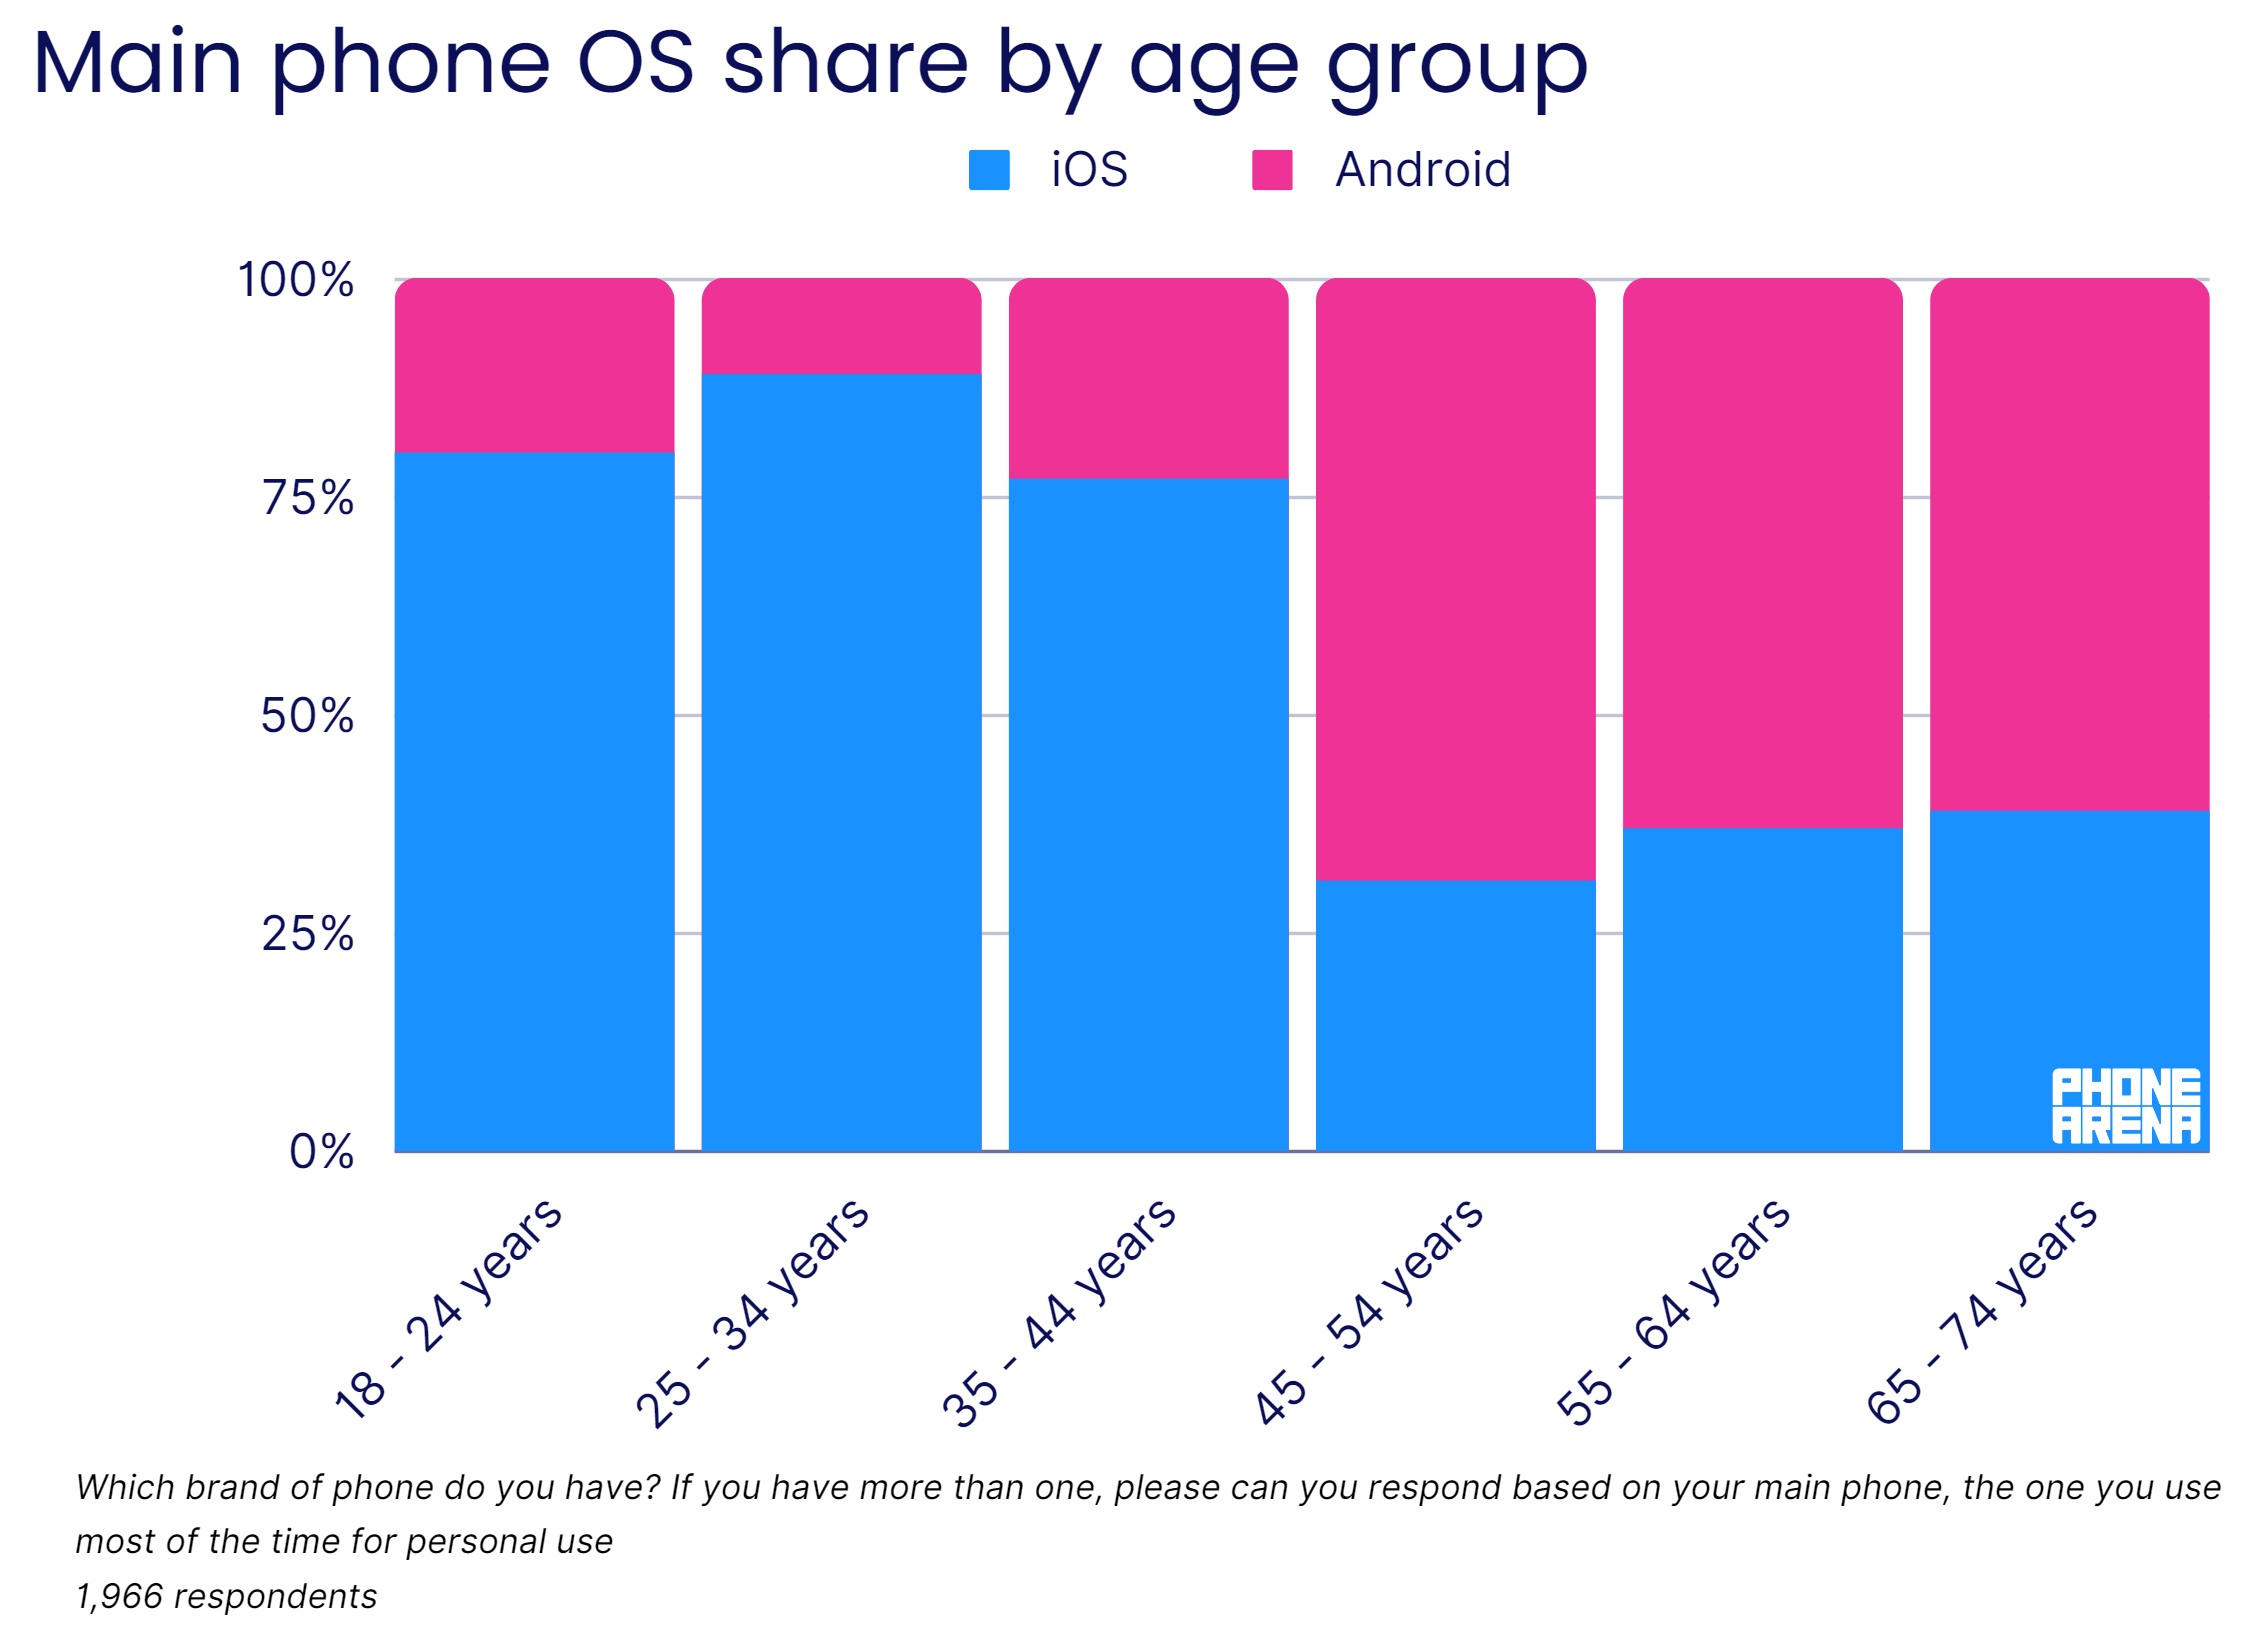 Samsung may be the stateside king of Android, but Apple still has 61% of the US market in the bag